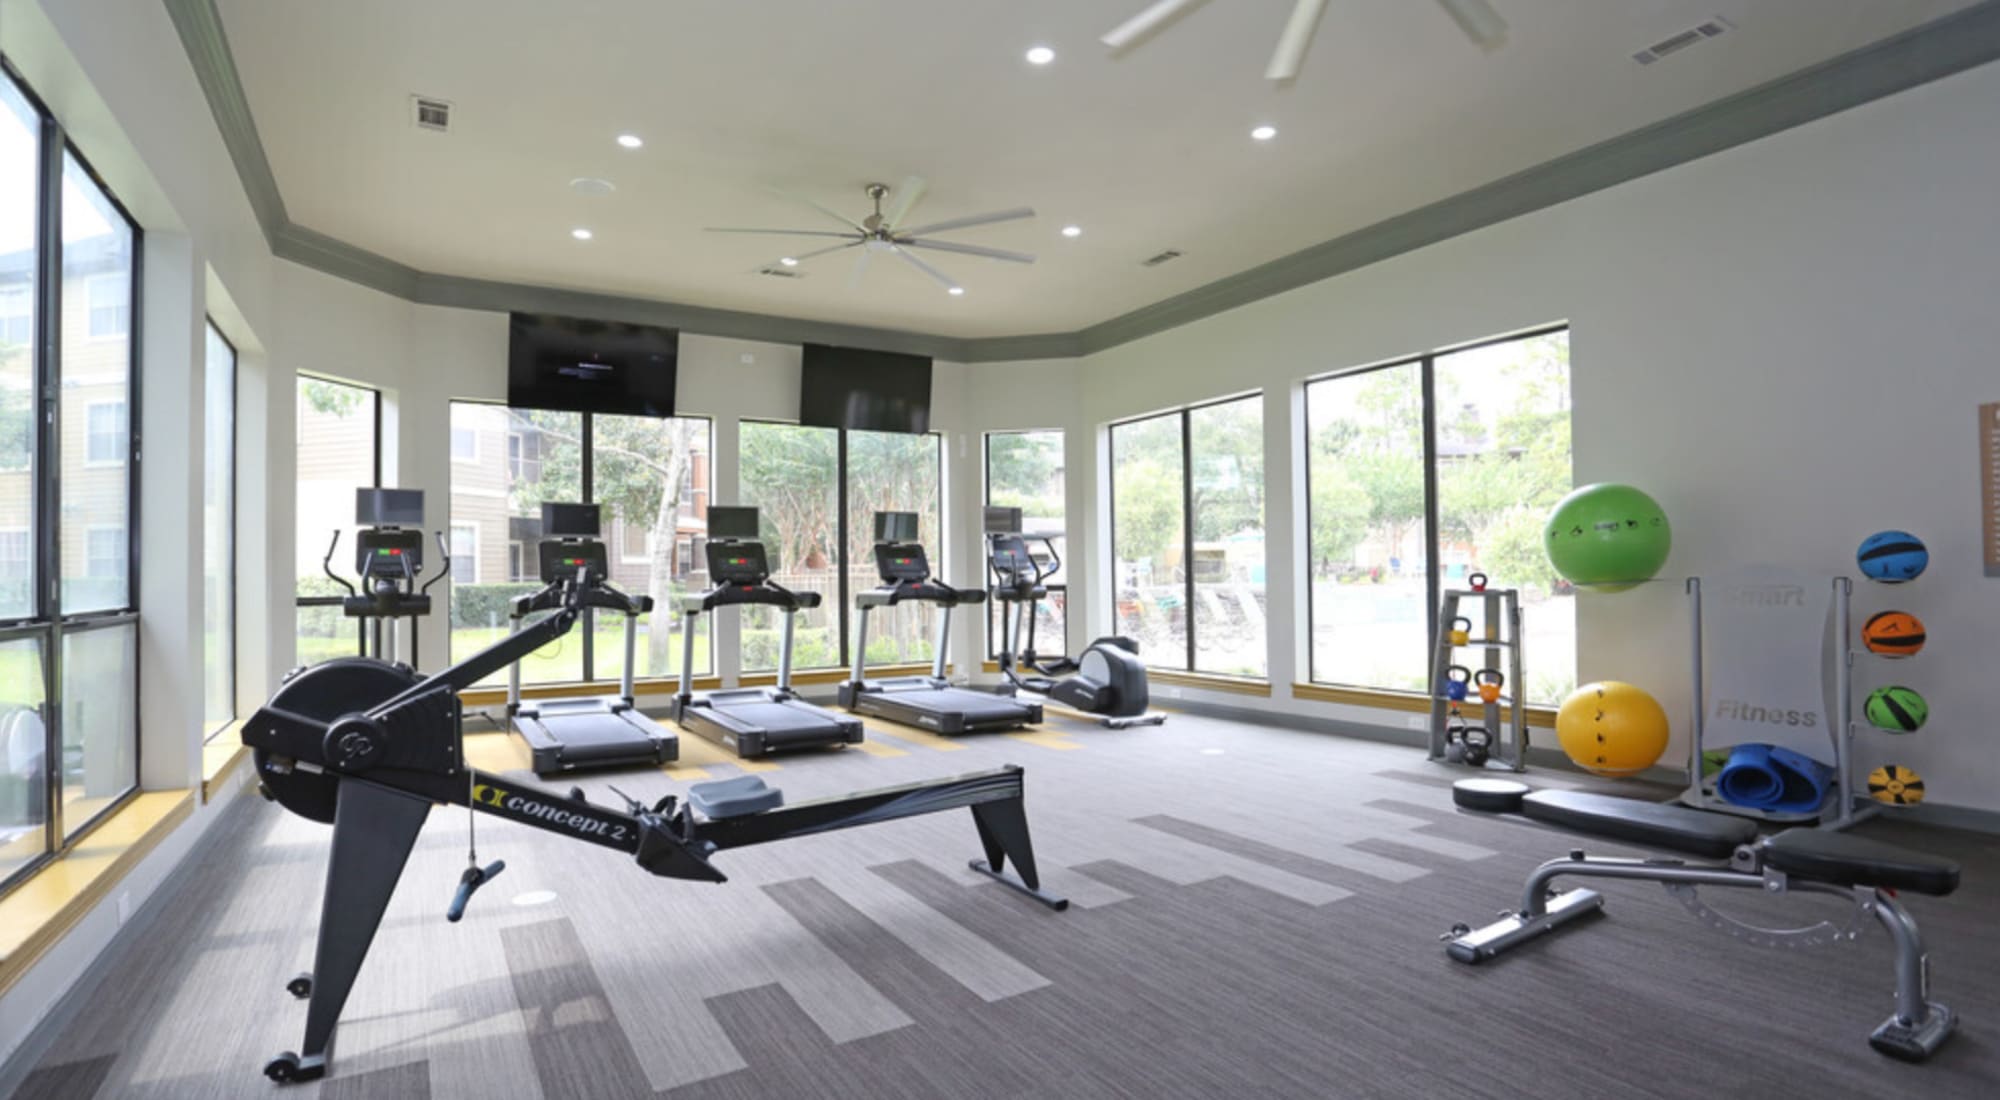 Fitness center at Legacy at Cypress in Cypress, Texas